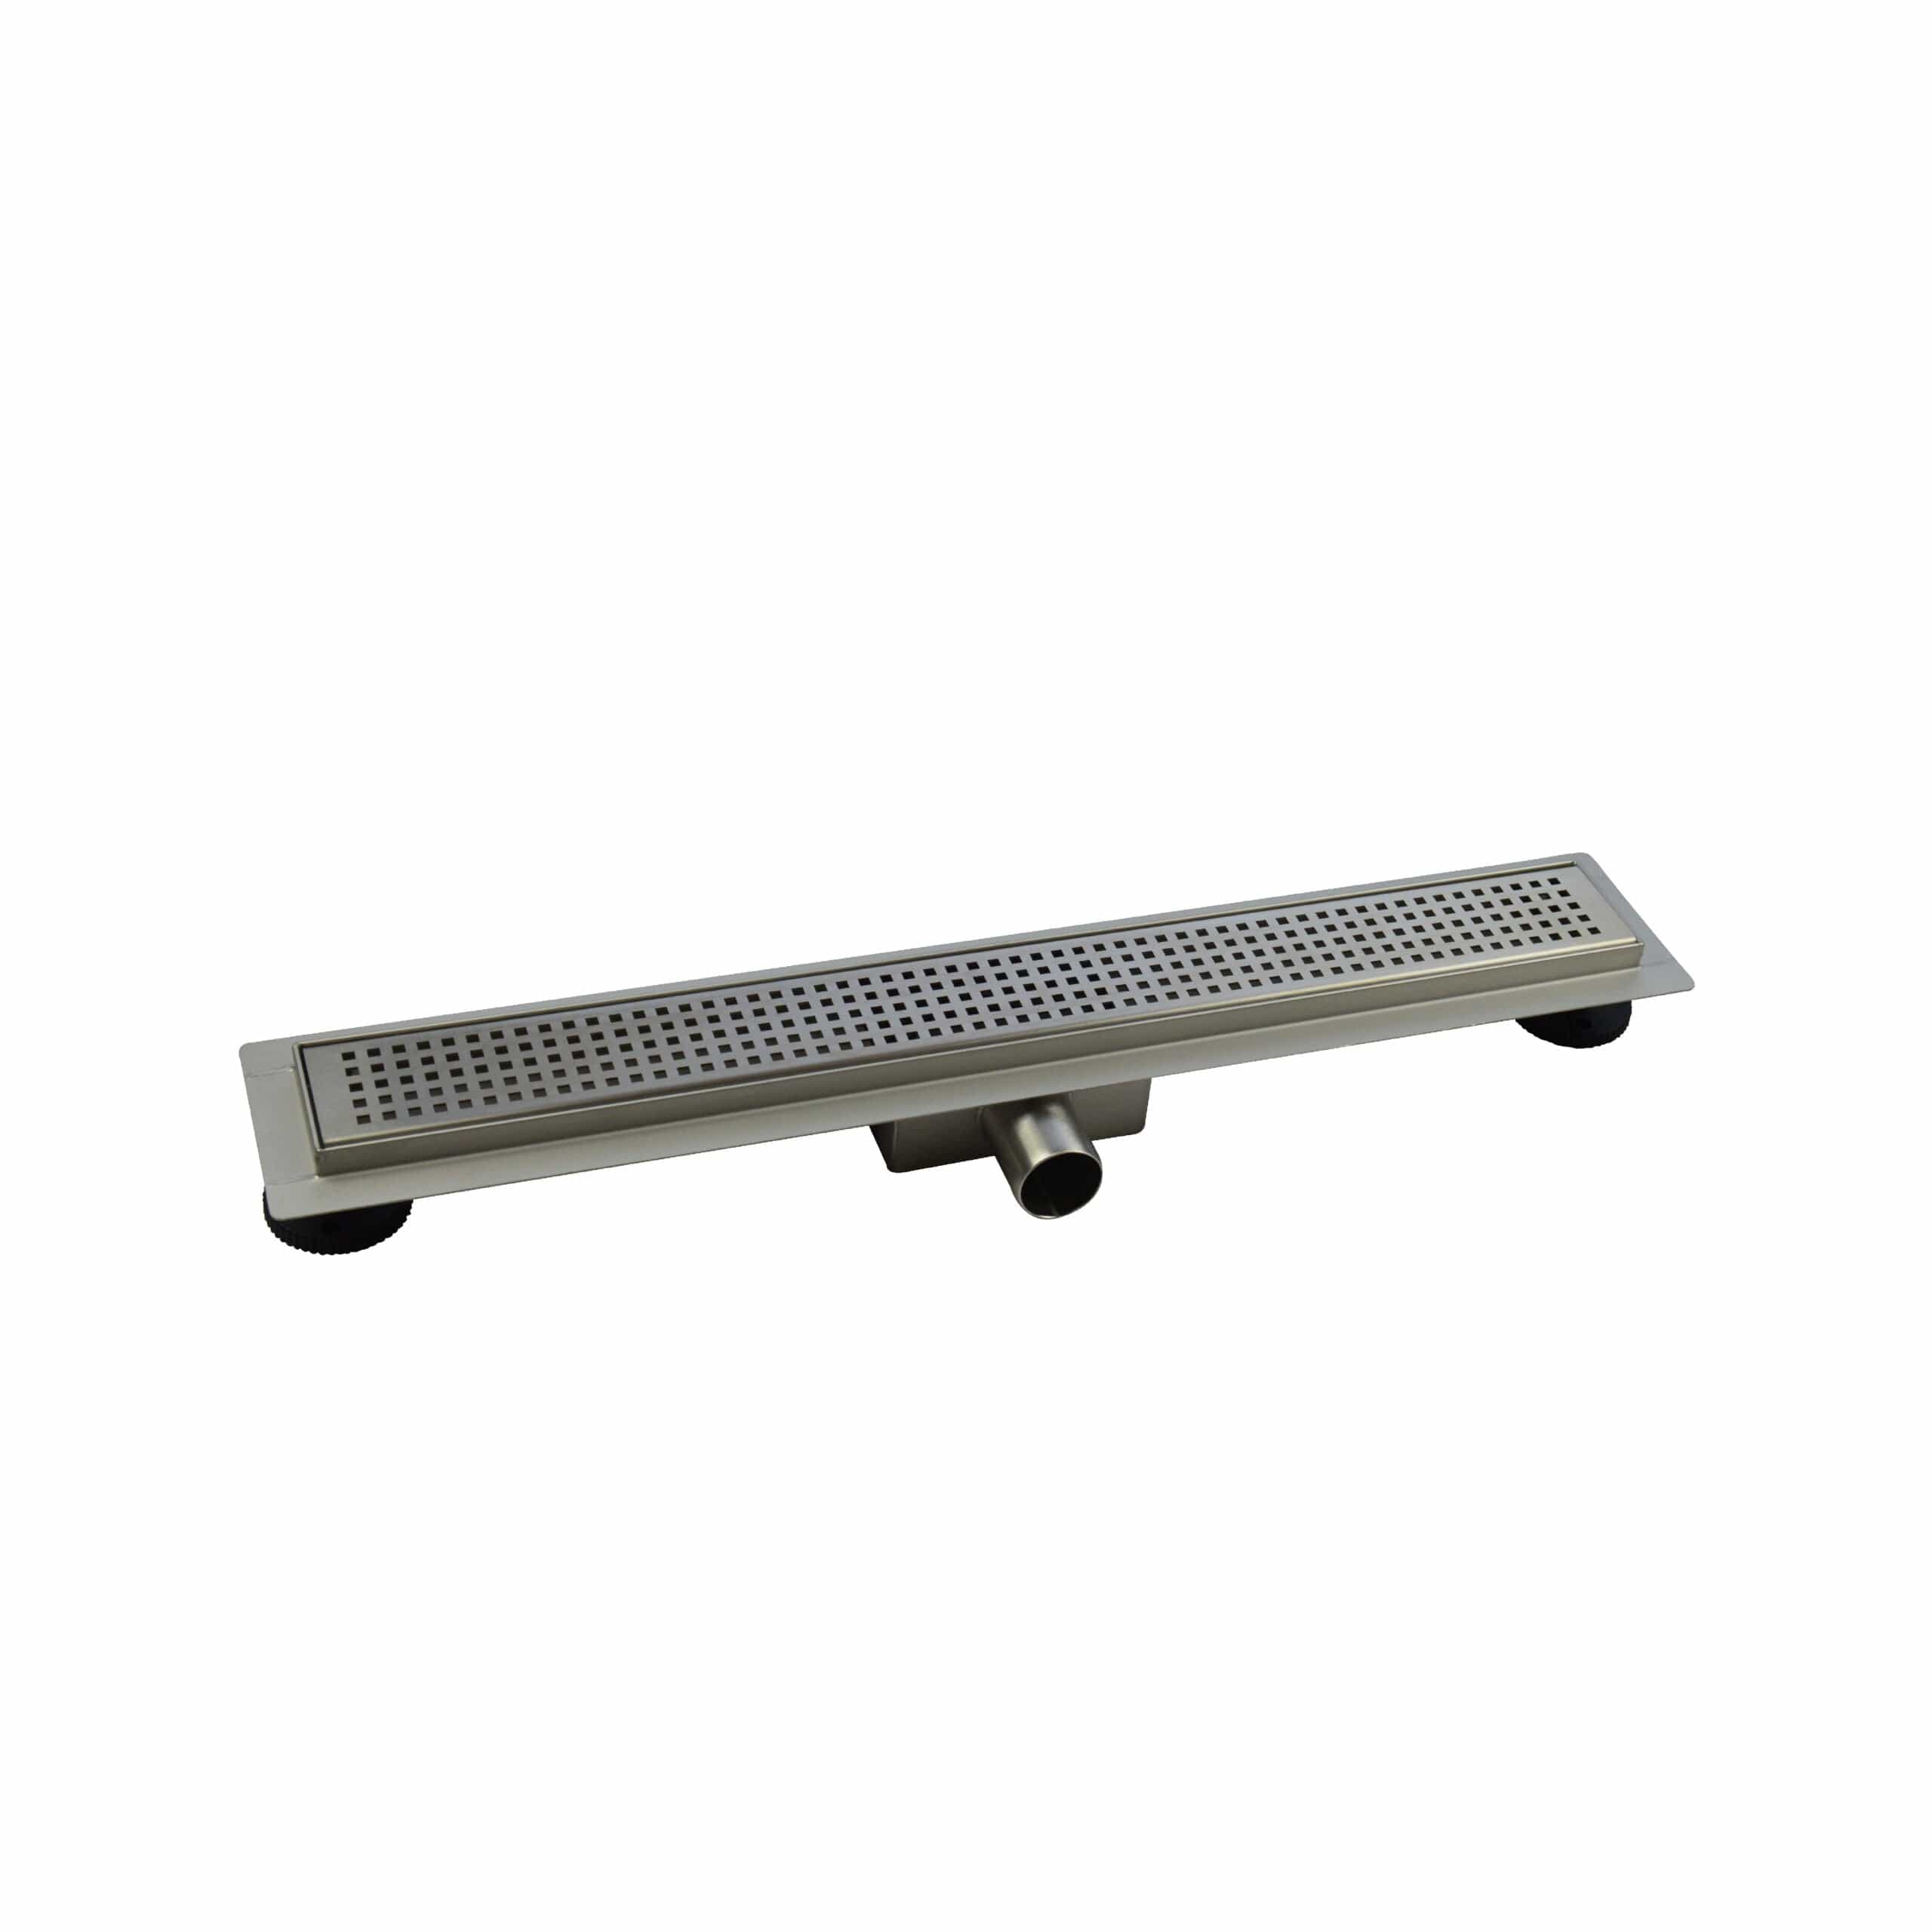 Tredex Linear Drain With Horizontal Outlet (P-trap) 800X70X67mm | Supply Master | Accra, Ghana Bathroom Accessories Buy Tools hardware Building materials